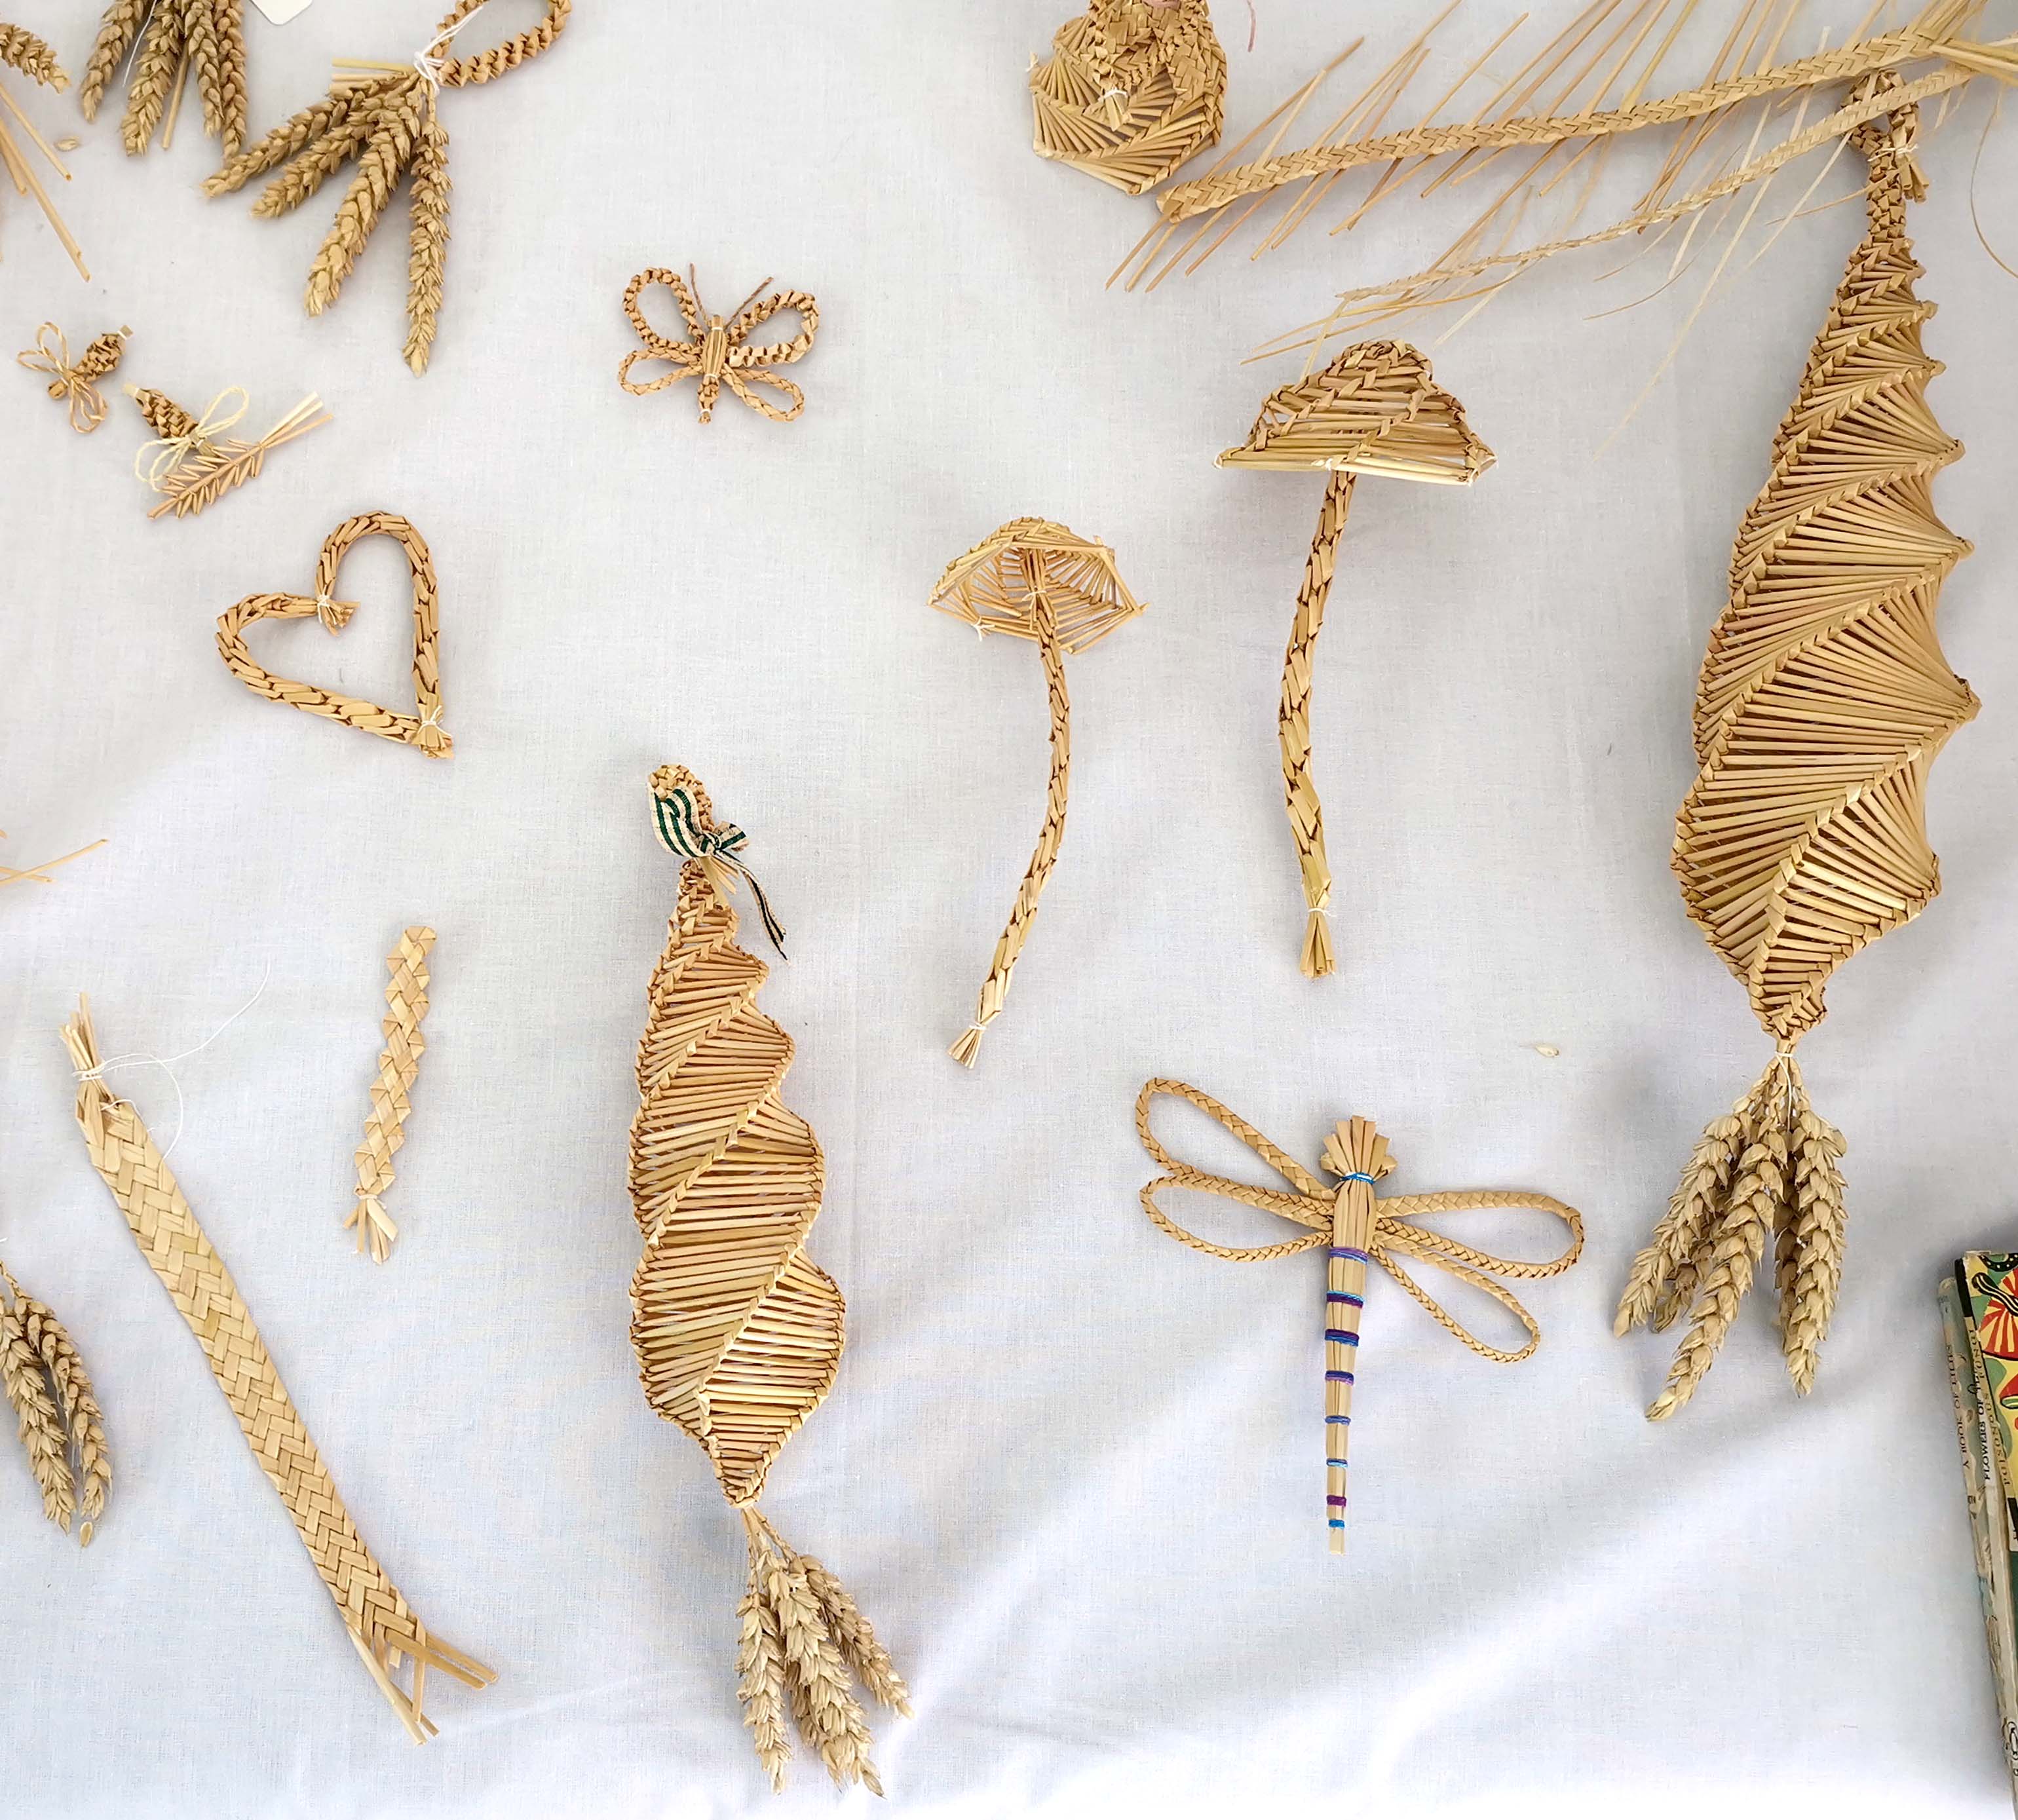 straw work by Penny Maltby